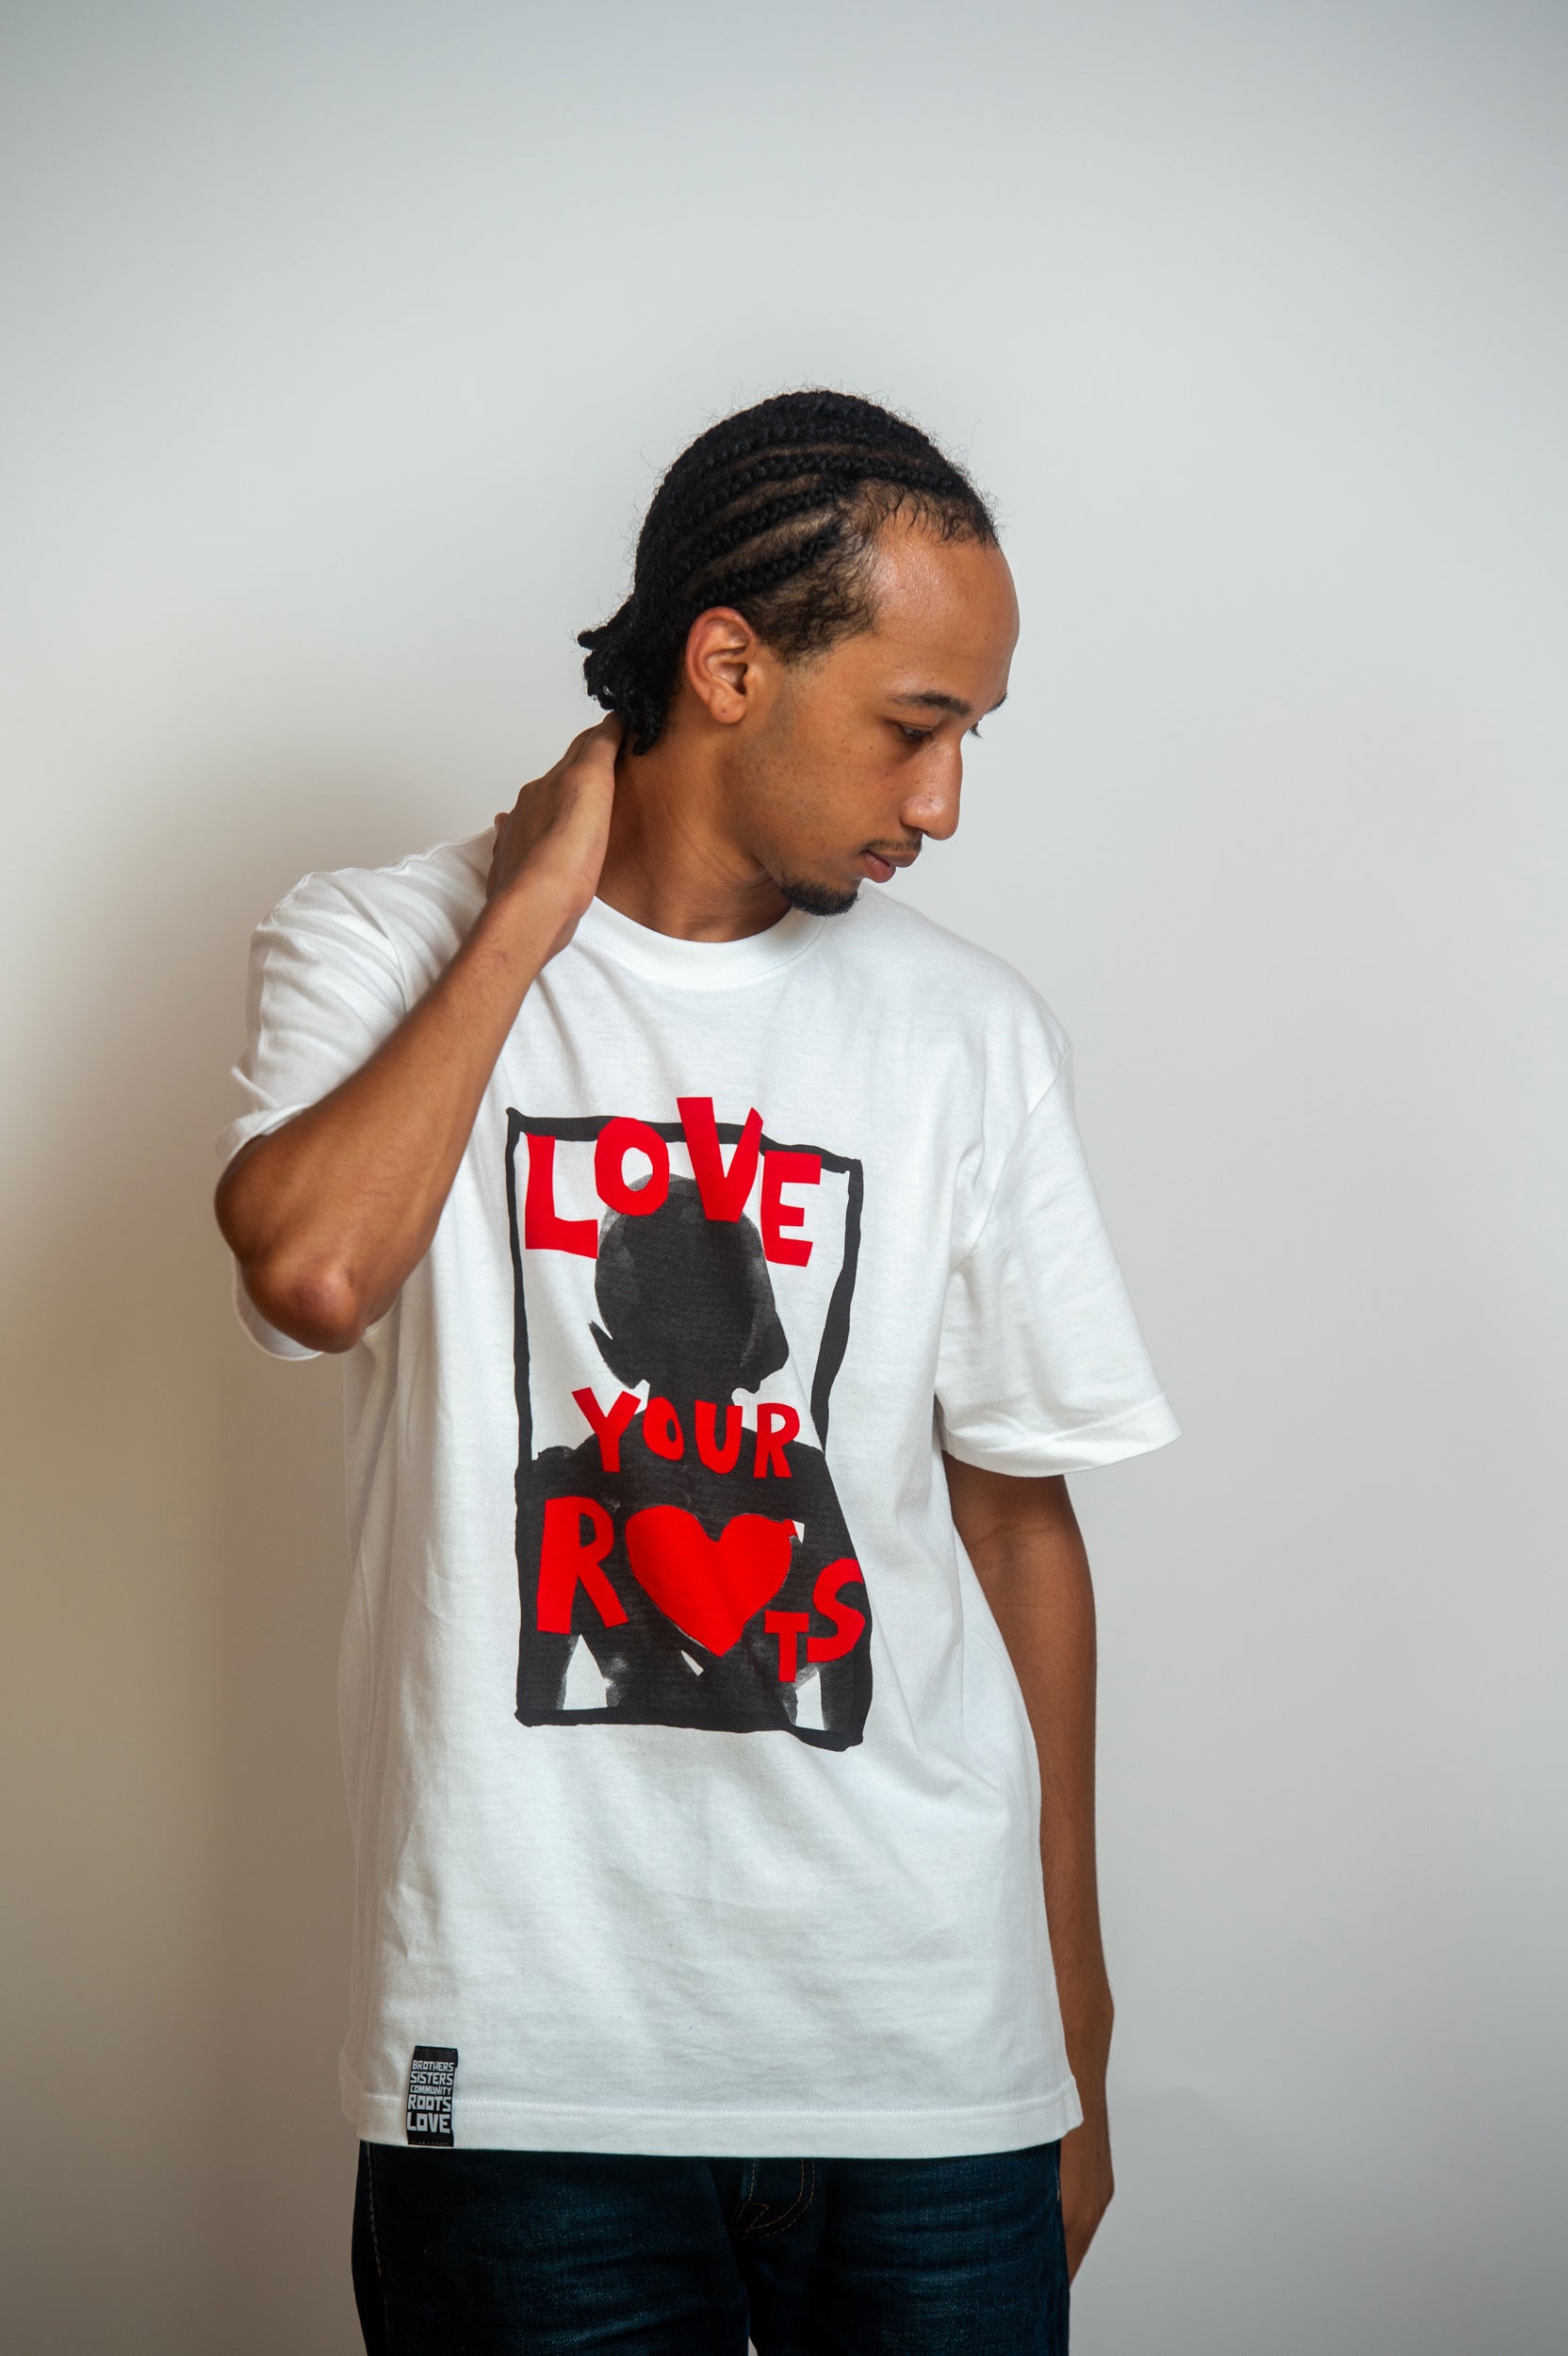 LOVE YOUR ROOTS male model